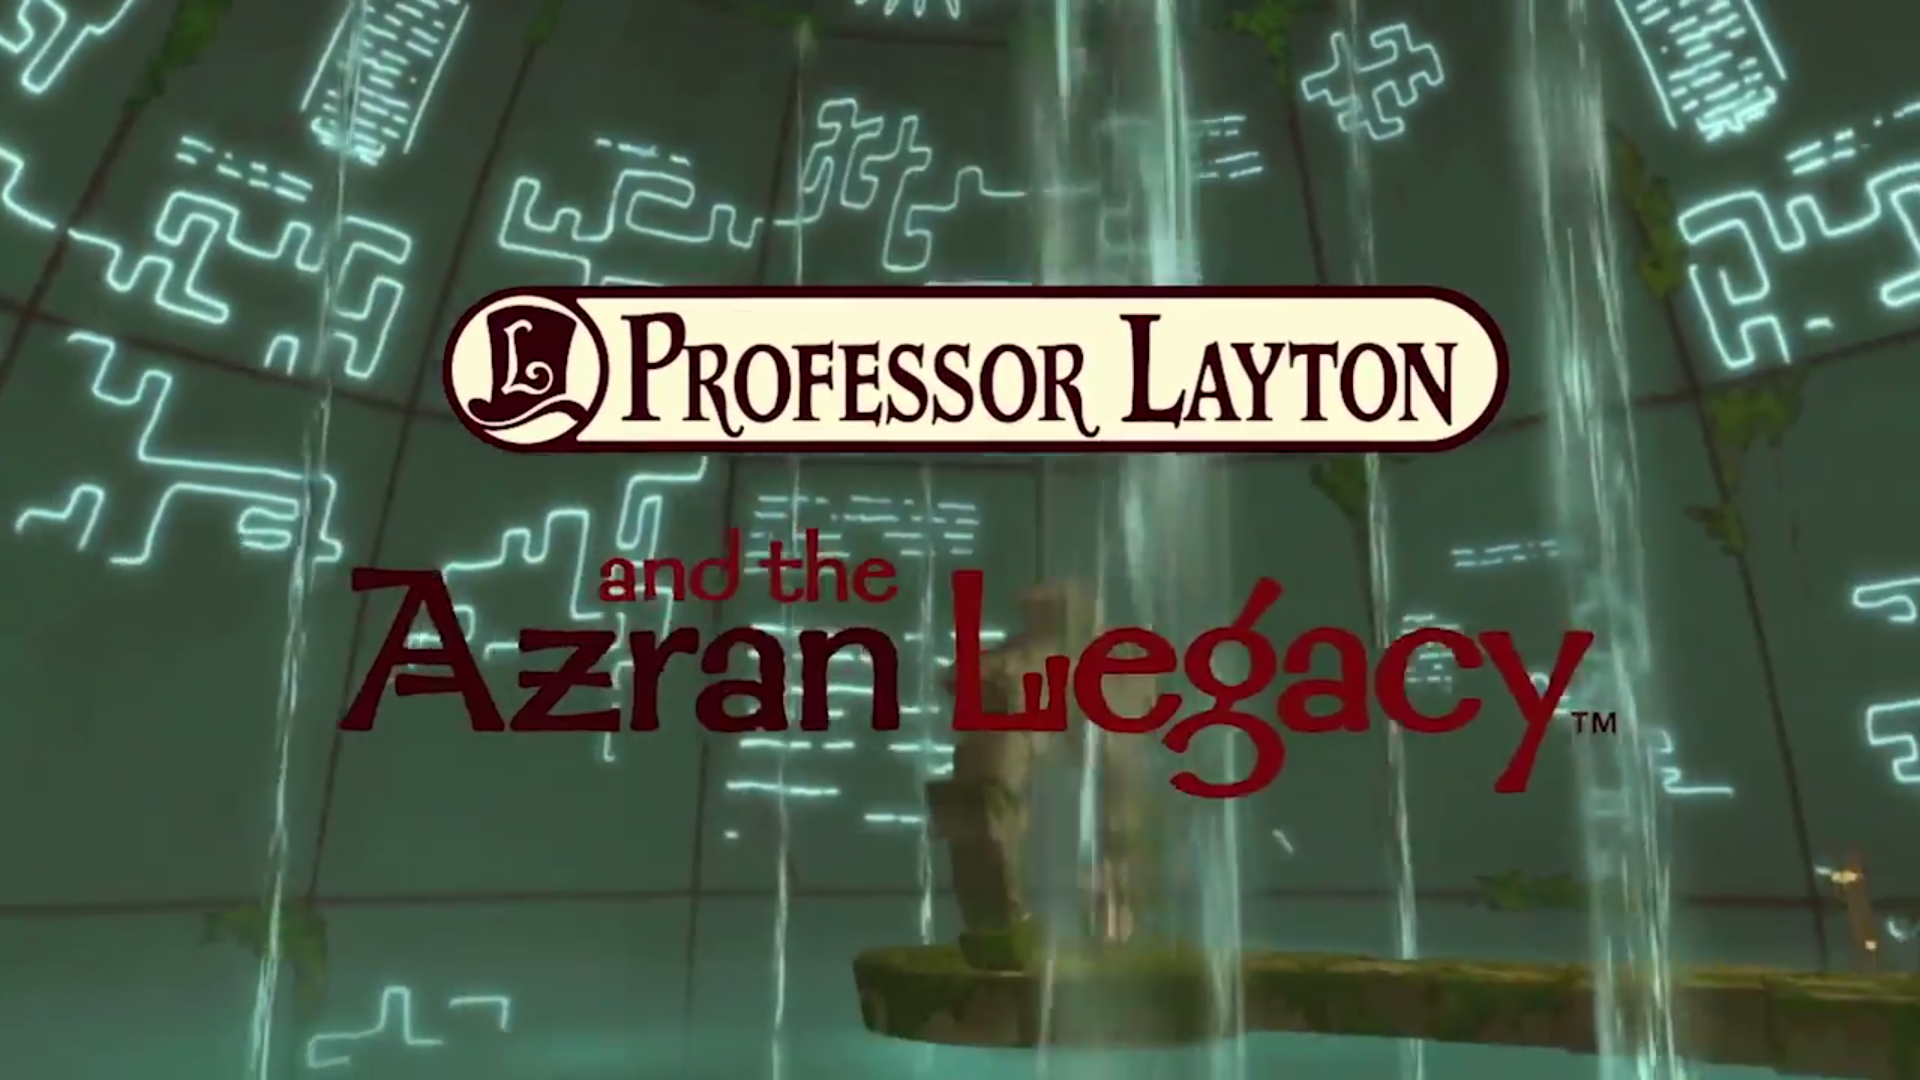 Emmy’s Story “Professor Layton and the Azran Legacy”